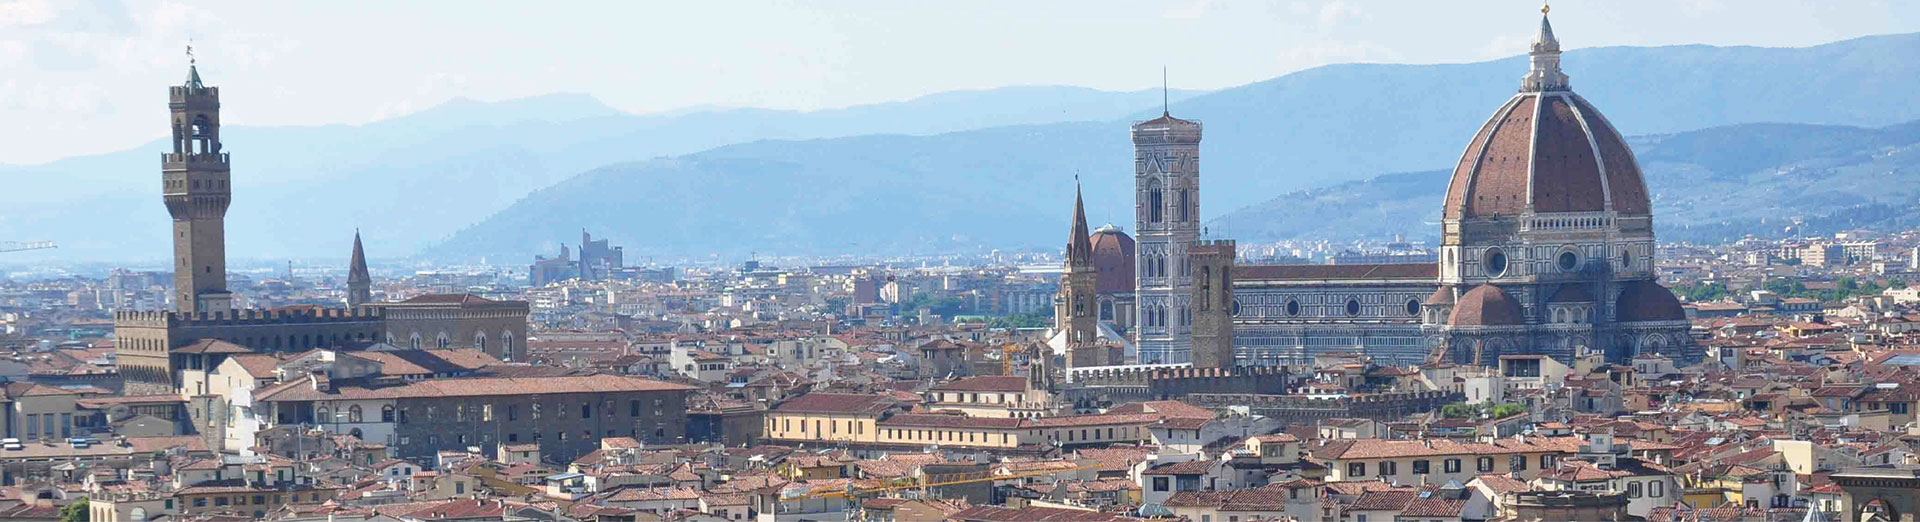 Banners-Florencia-02